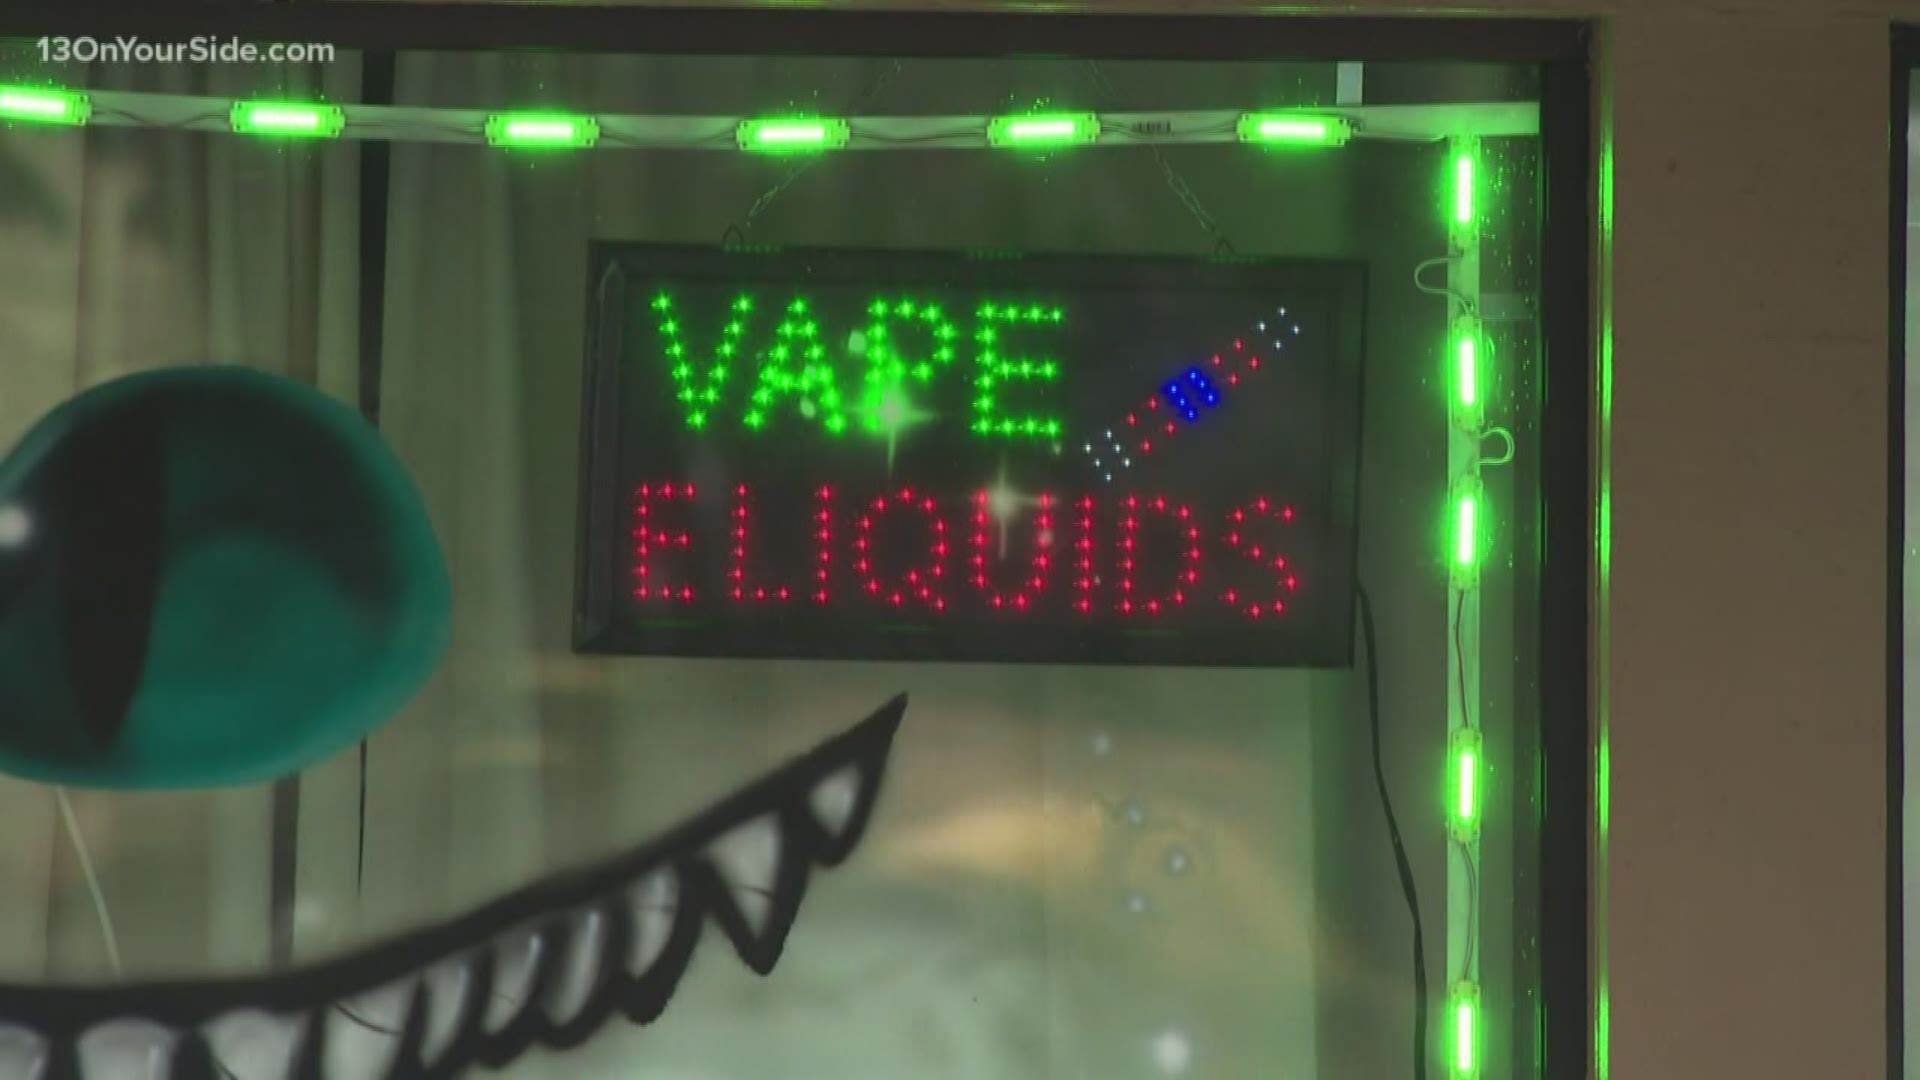 A Michigan judge temporarily blocked the state's weeks-old ban on flavored e-cigarettes Tuesday.